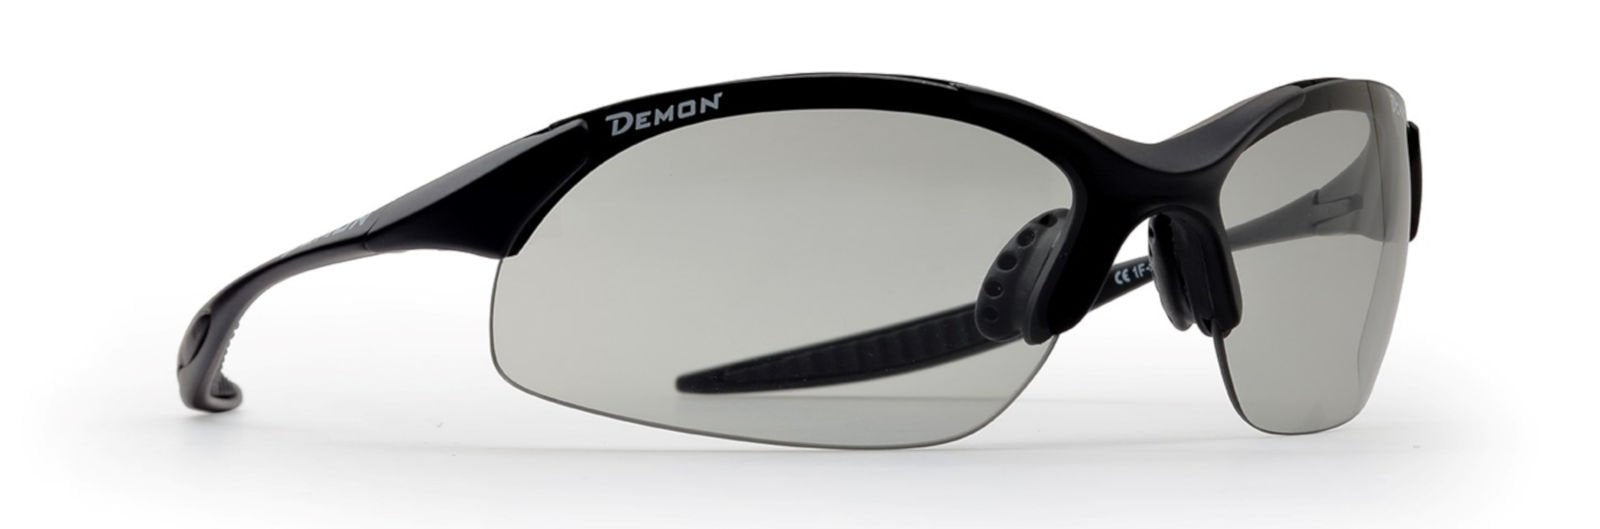 Cycling glasses with photocormatic lenses dchrom model 832 matt black